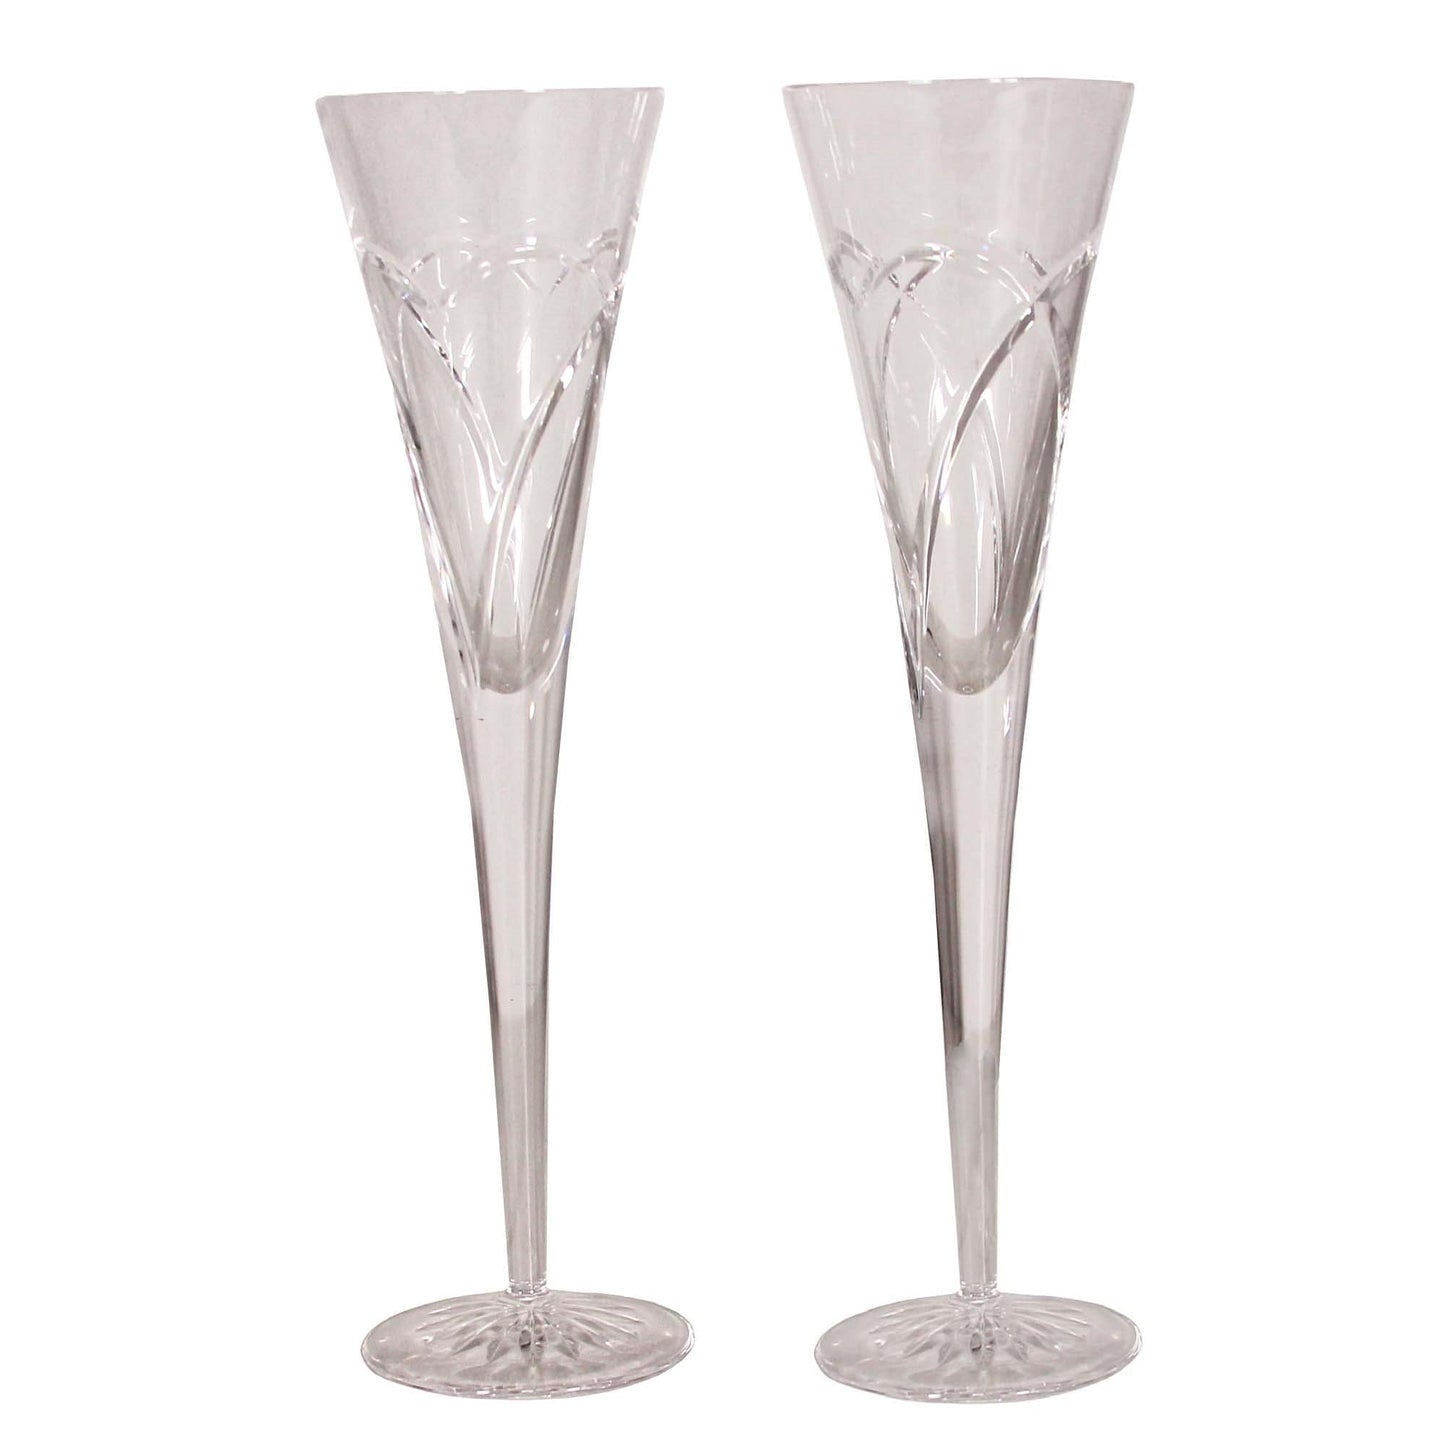 Sell Waterford Crystal  How Much is Waterford Crystal Worth